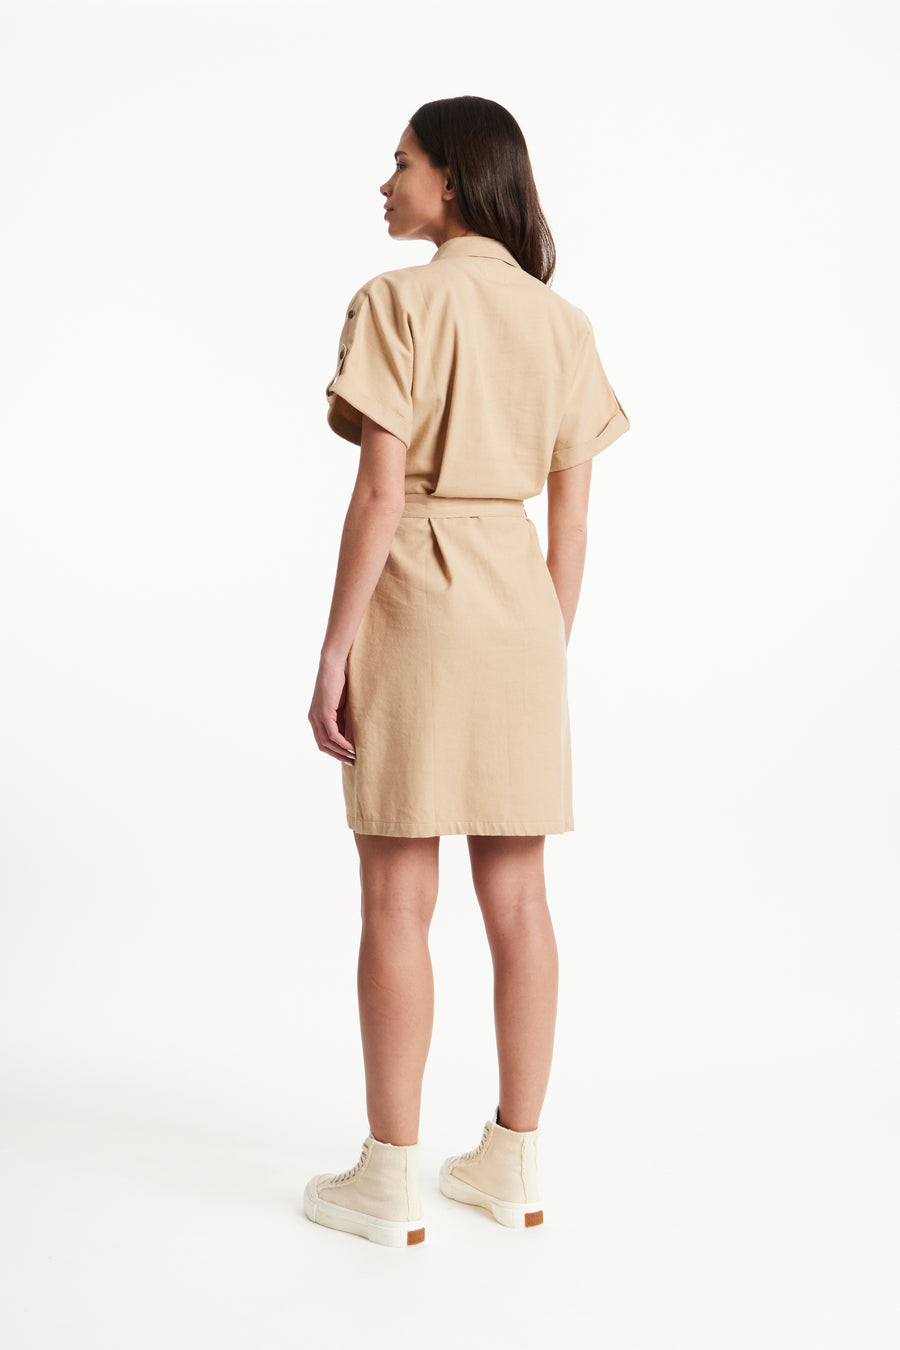 People Tree Fair Trade, Ethical & Sustainable Mattie Dress in Sand 100% Organic Cotton